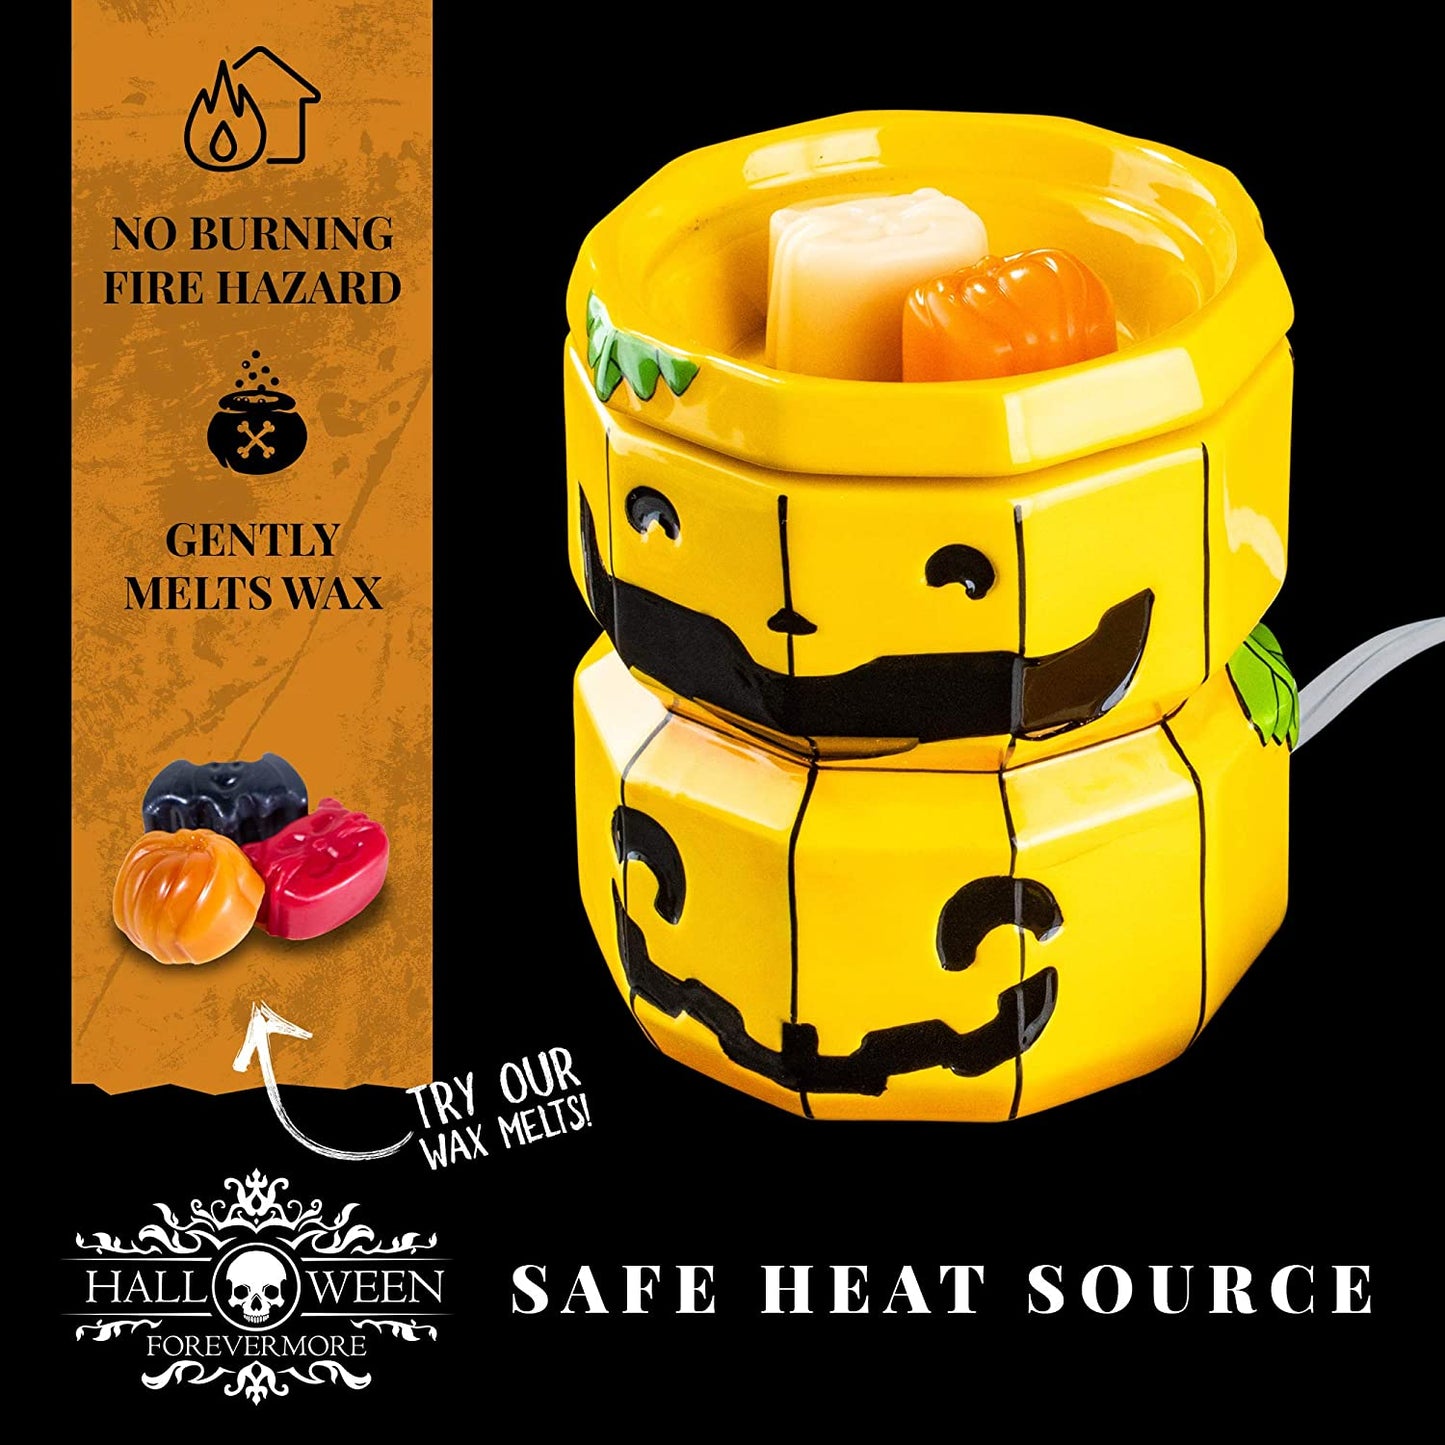 Jack-O-Lantern Ceramic Wax Warmer | Flameless & Easy to Clean | Handcrafted Horror-Style Character Aromatherapy Candle Warmers